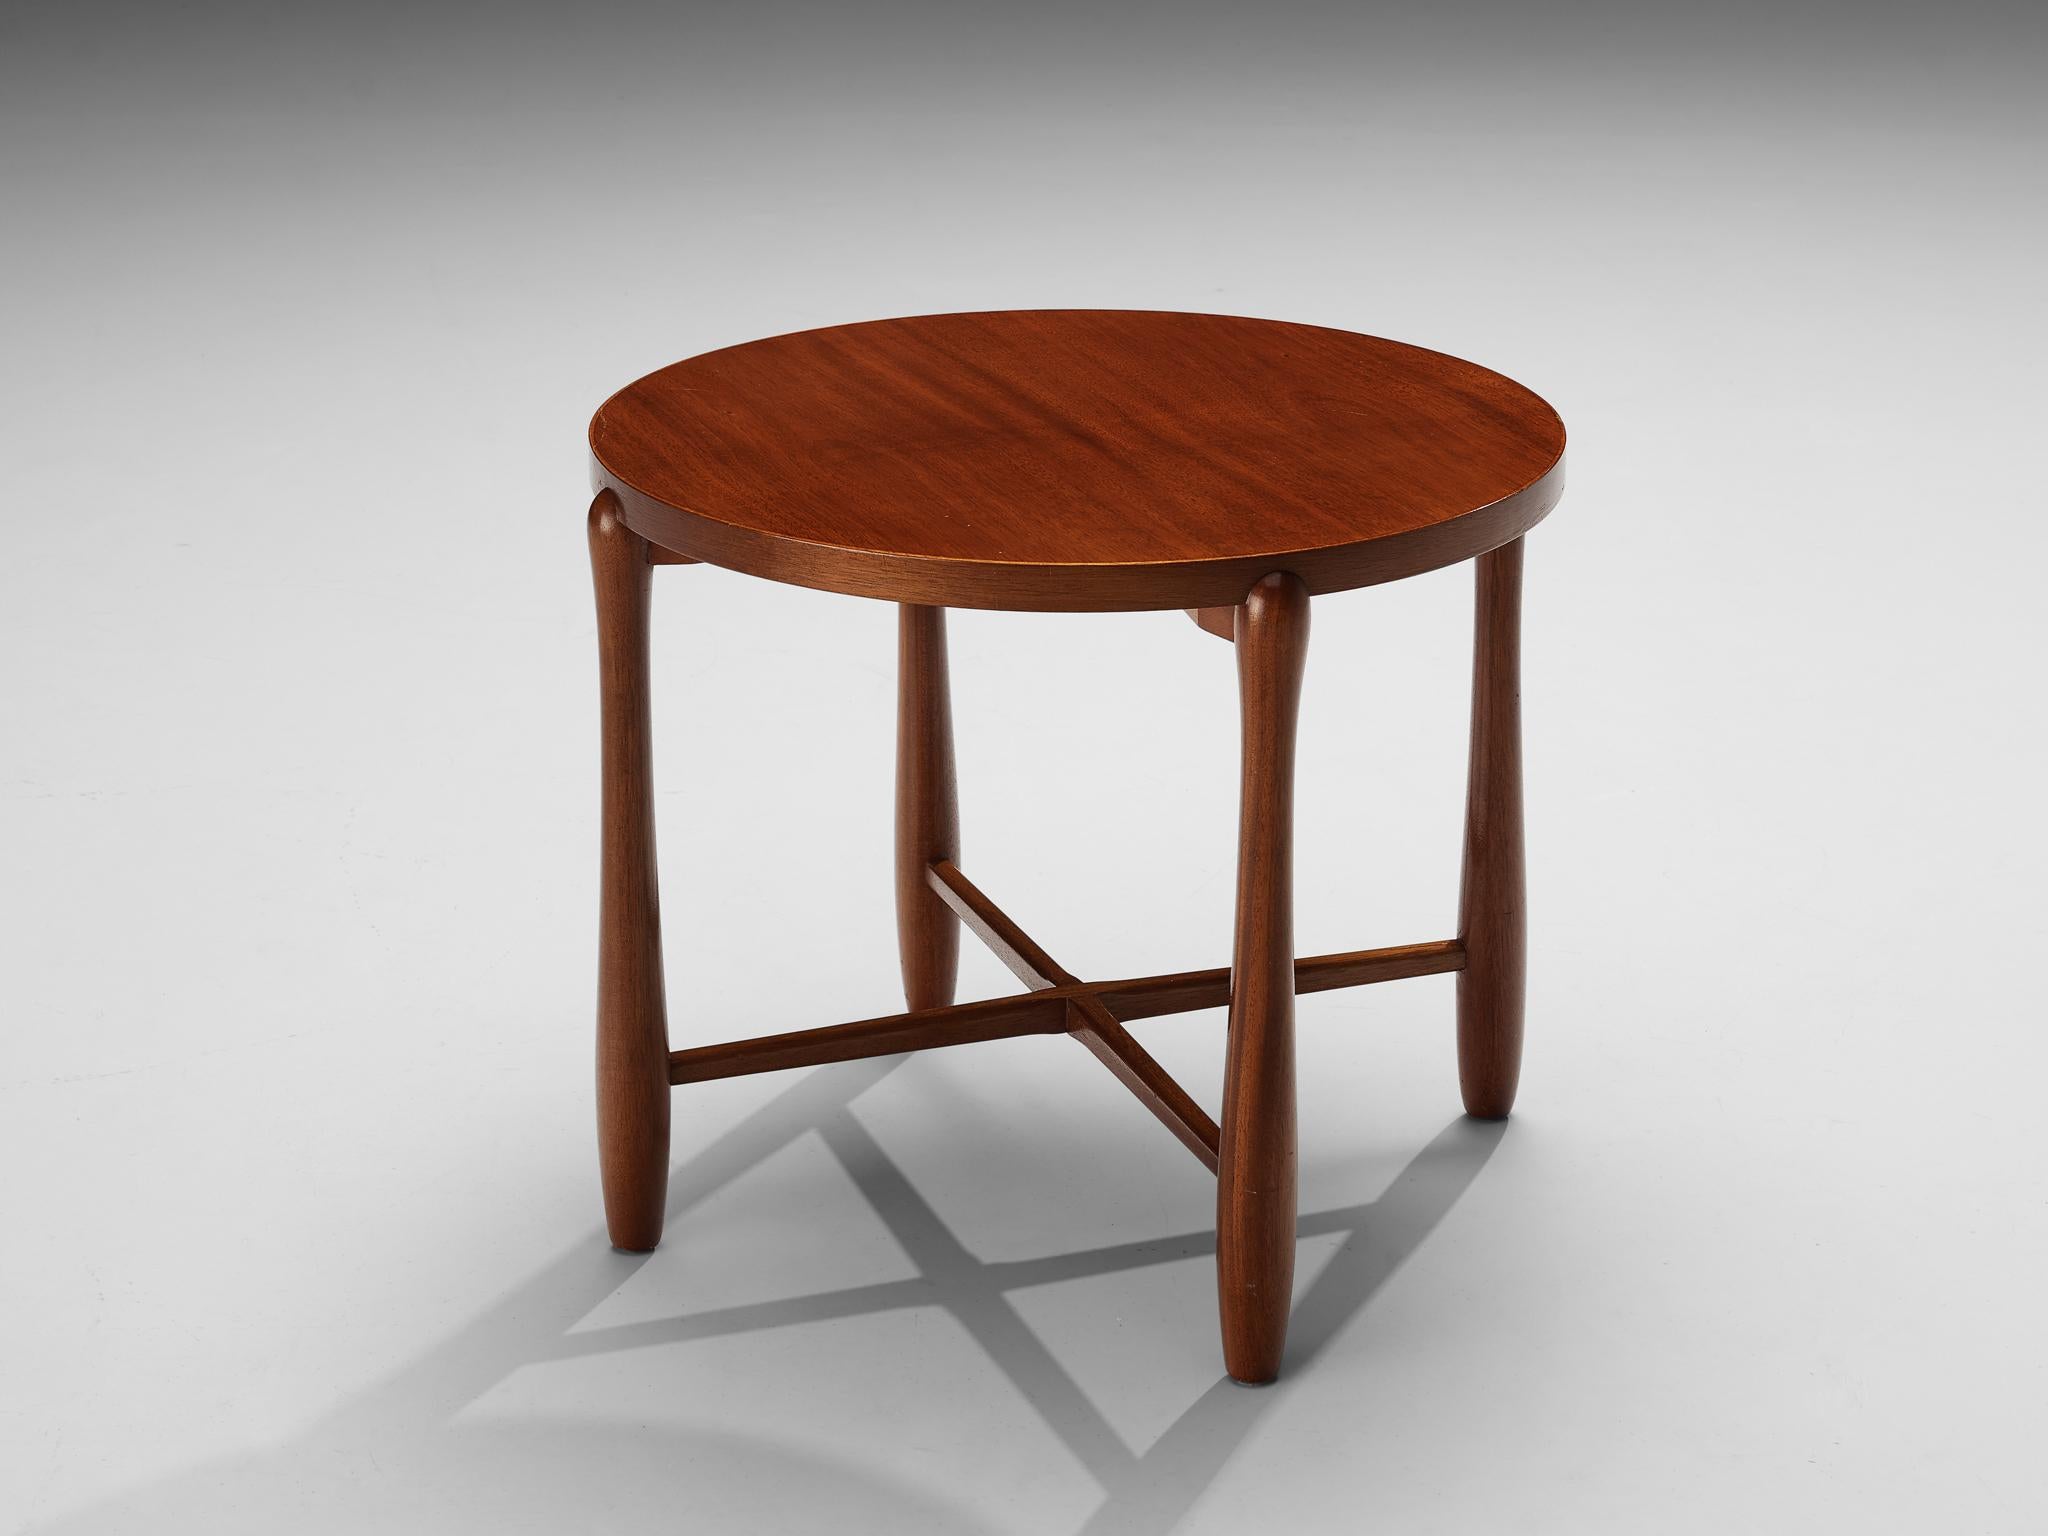 Coffee table, mahogany, Sweden, 1950s

This delicate table that originates from Sweden is well-constructed in a precise manner composed of subtle and modest lines, resulting in an eloquent and simplistic furniture piece that is typical for Swedish